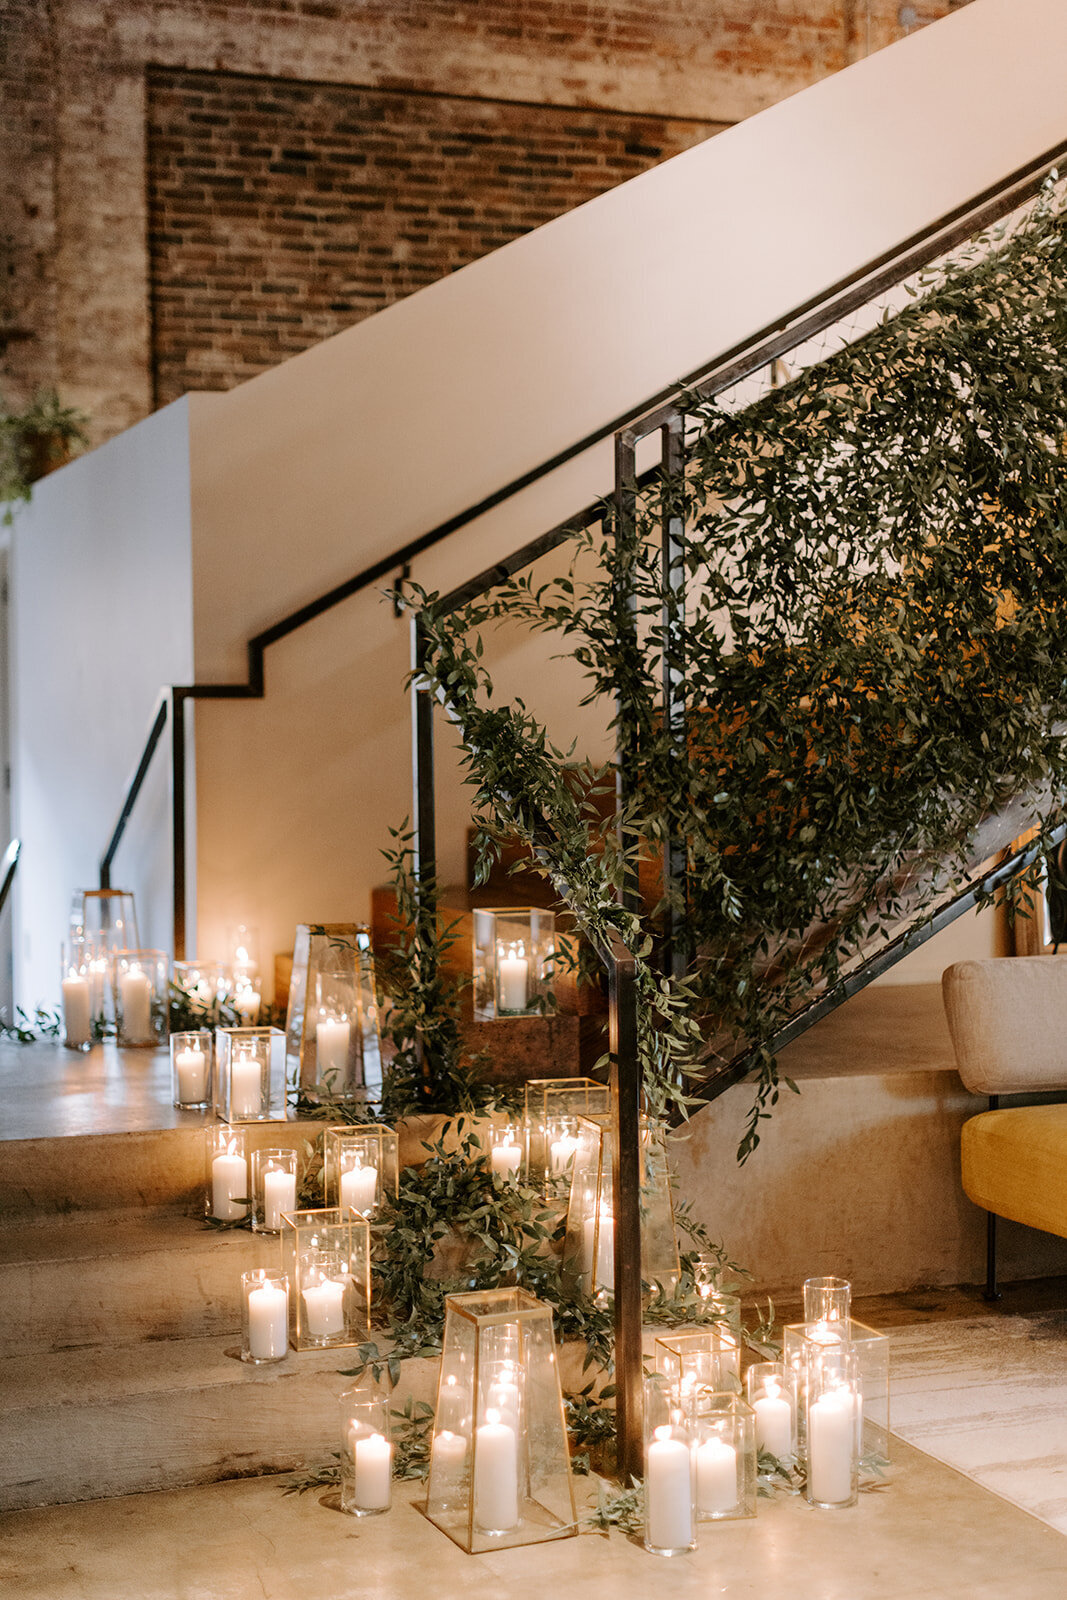 Wild Carrot wedding venue adorned with greenery and candles next to staircase